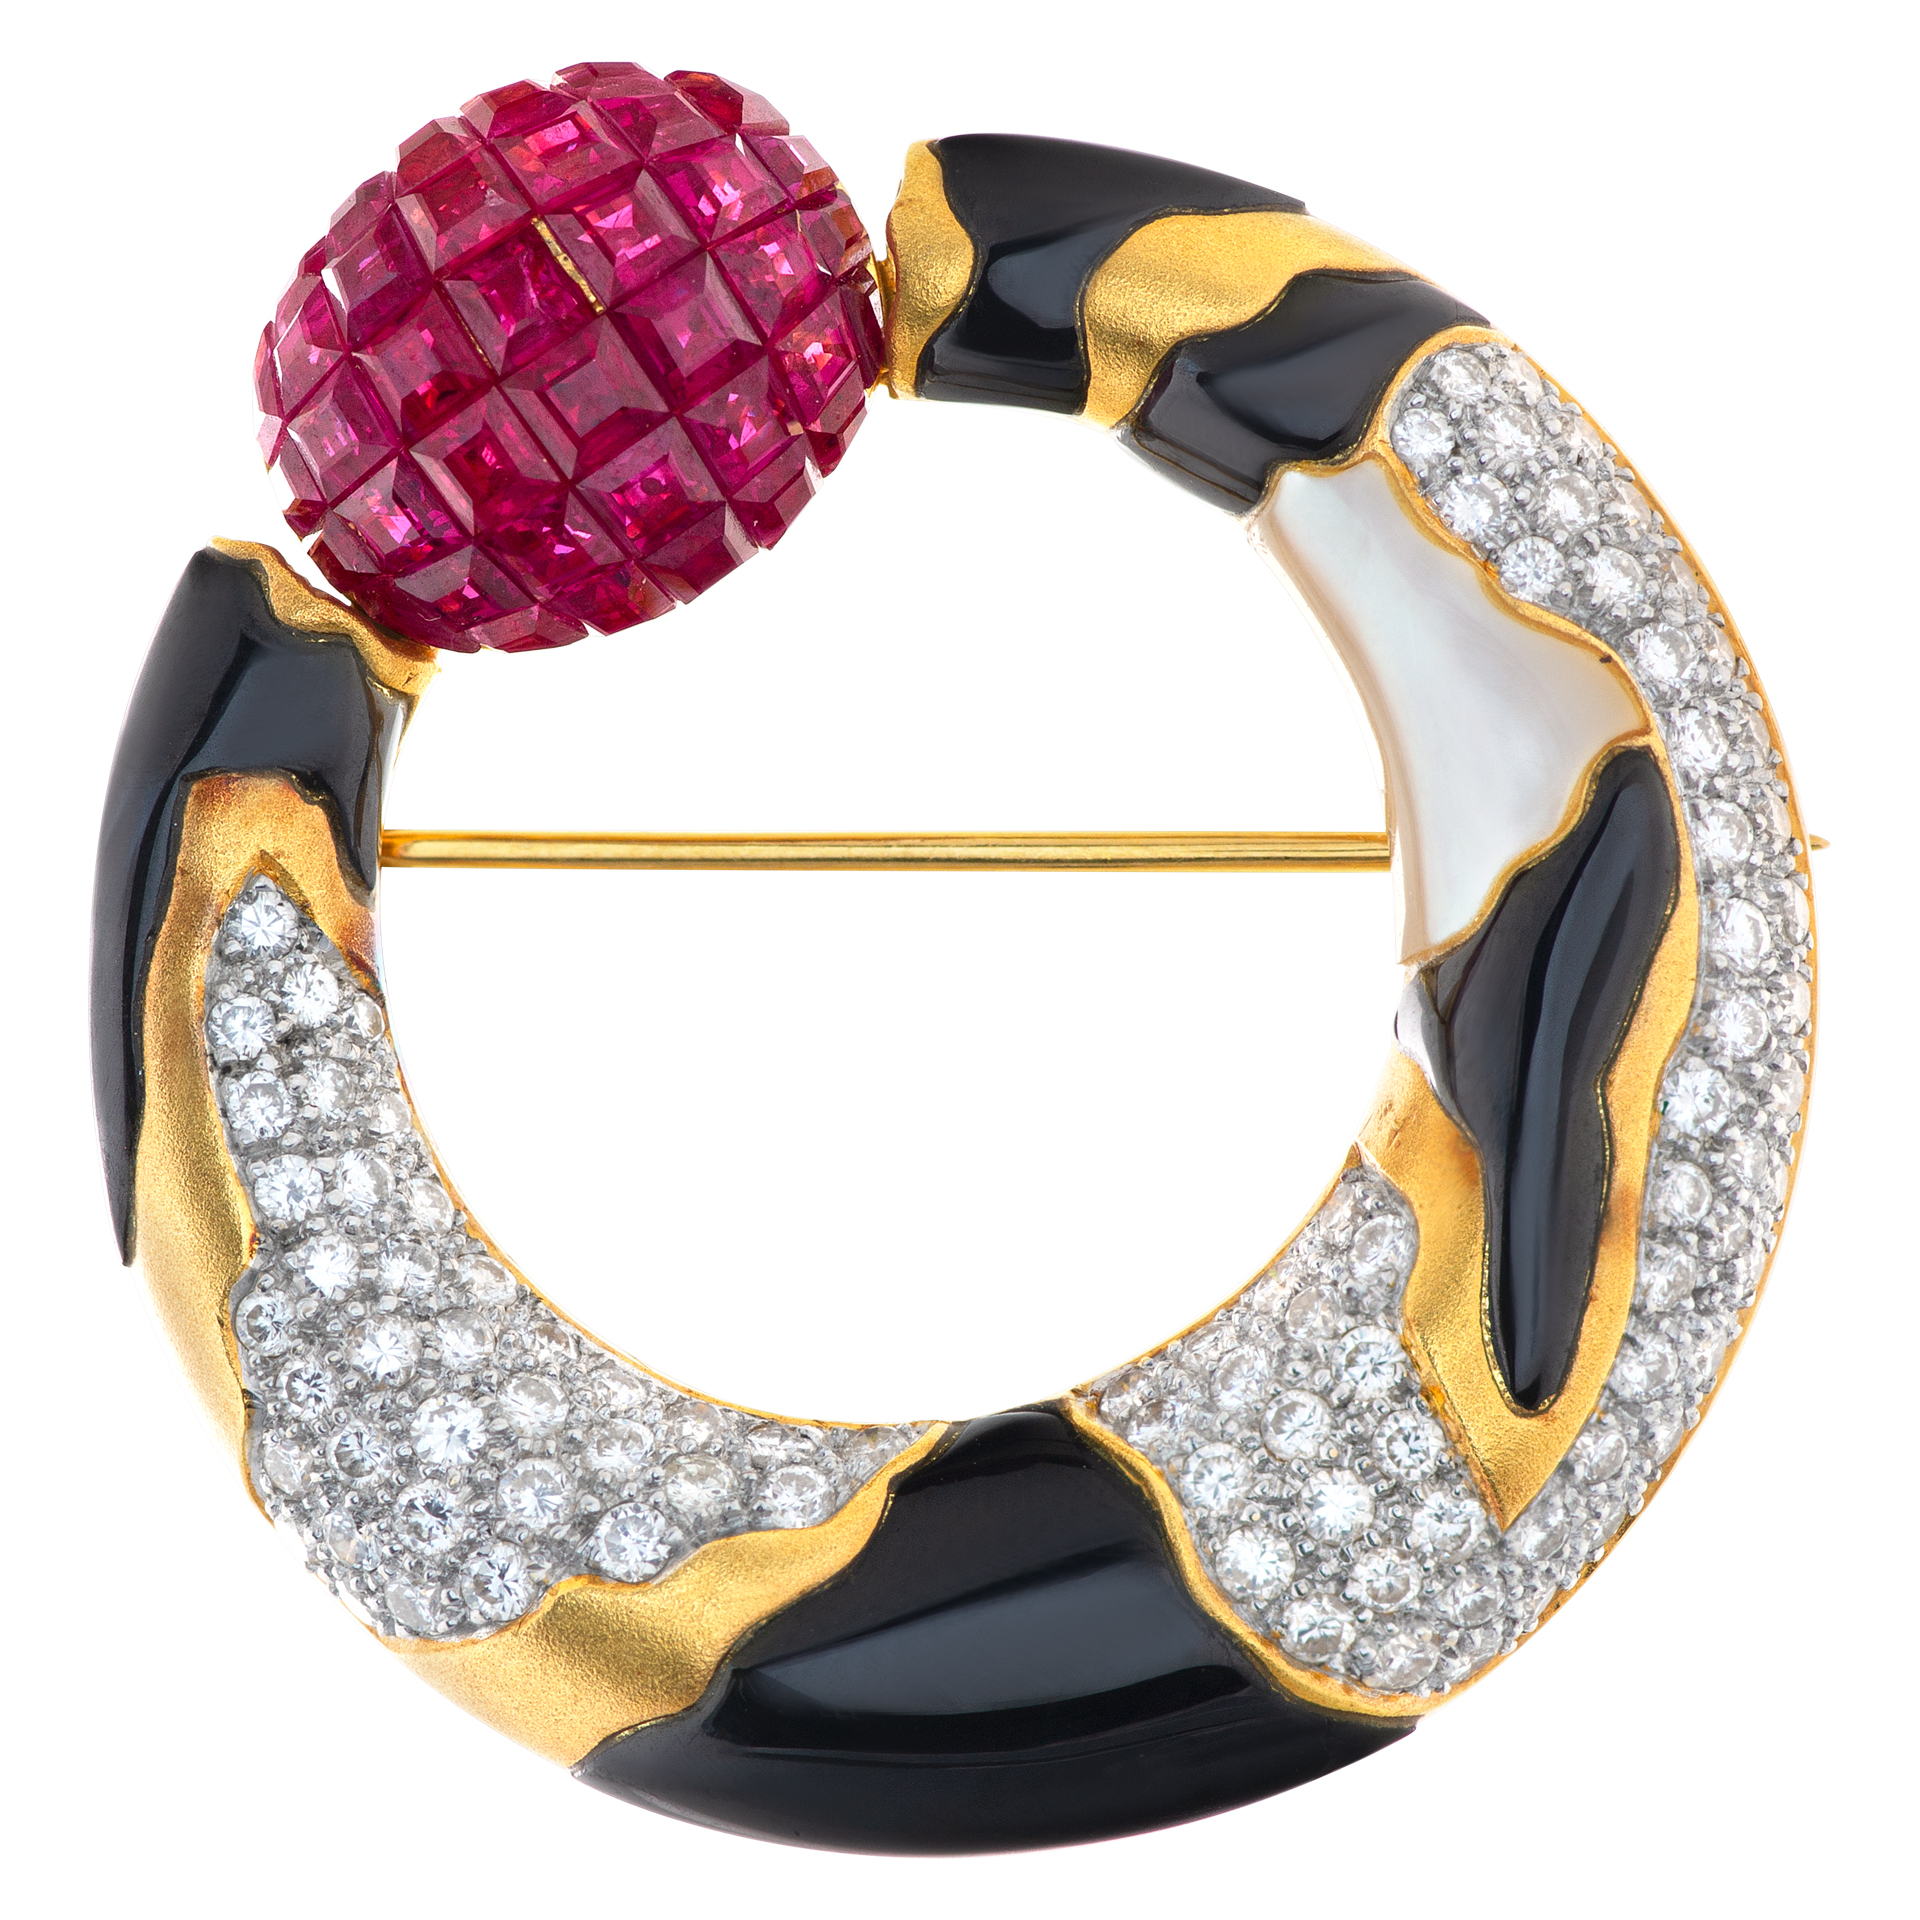 Moon design pin in 18k yellow gold with pave diamonds, mother of pearl, onyx and invisible set rubies.